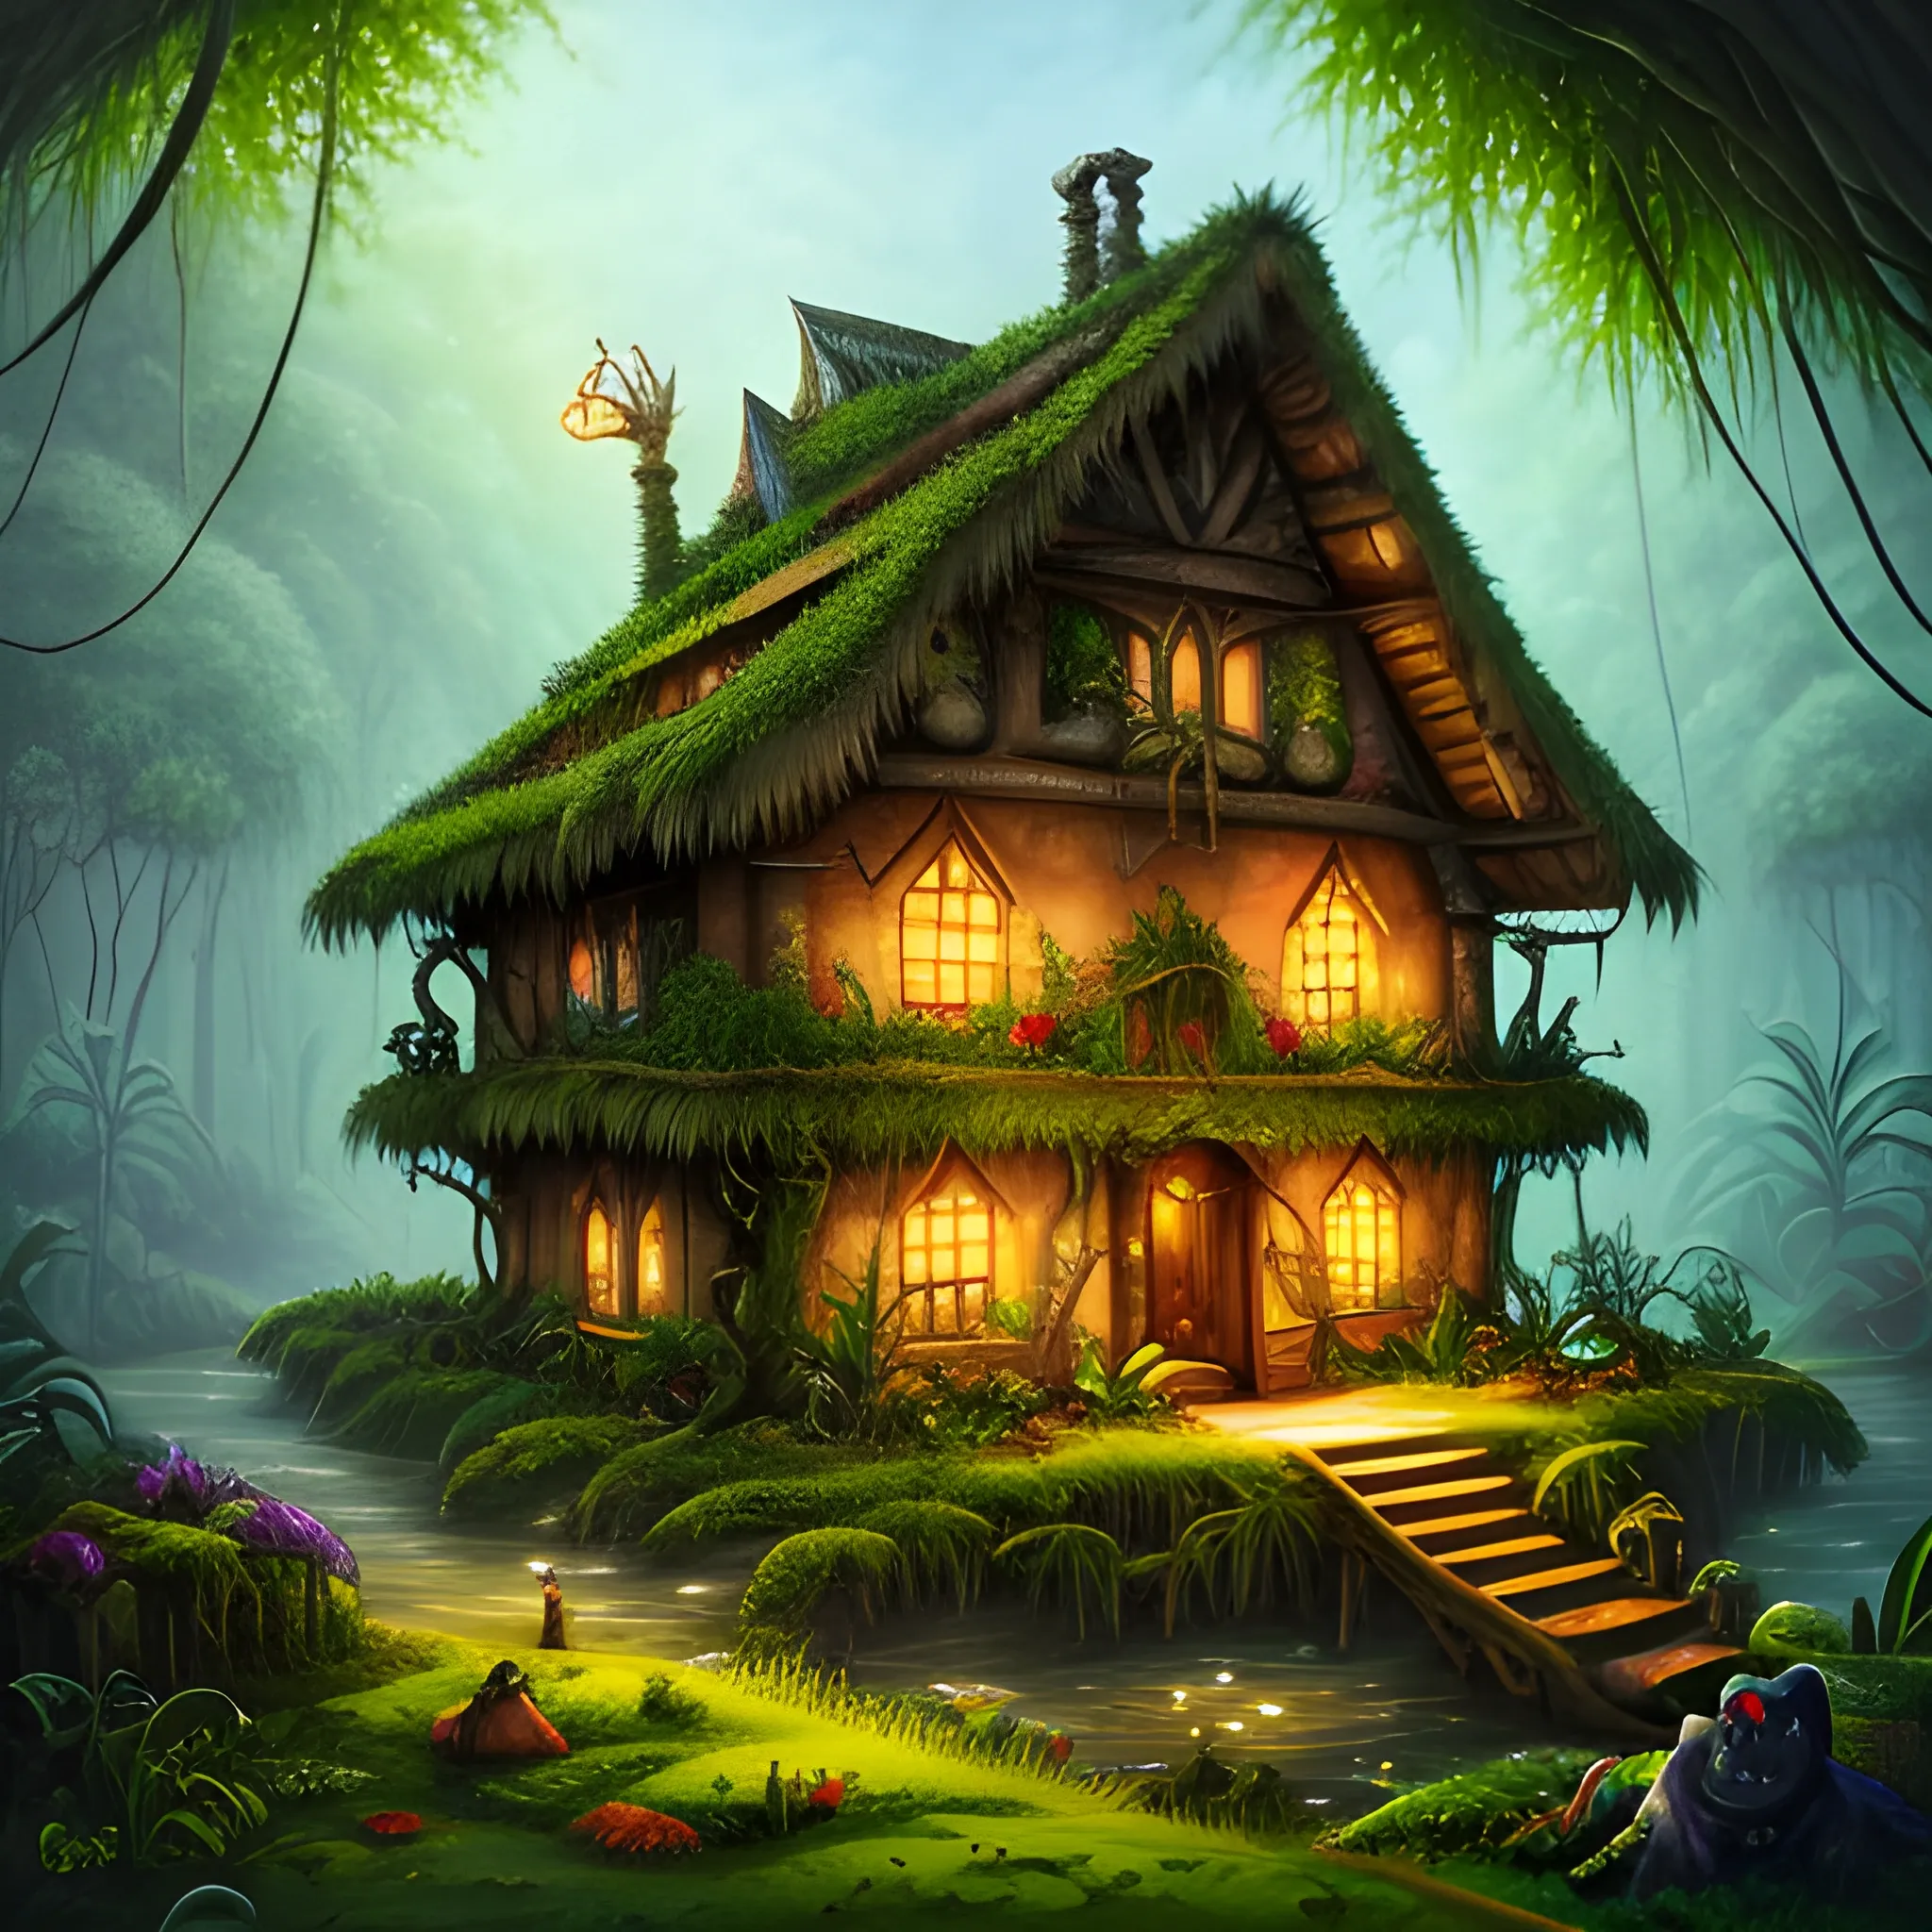 house in the middle of jungle, with elf and orc live together, oil painting style